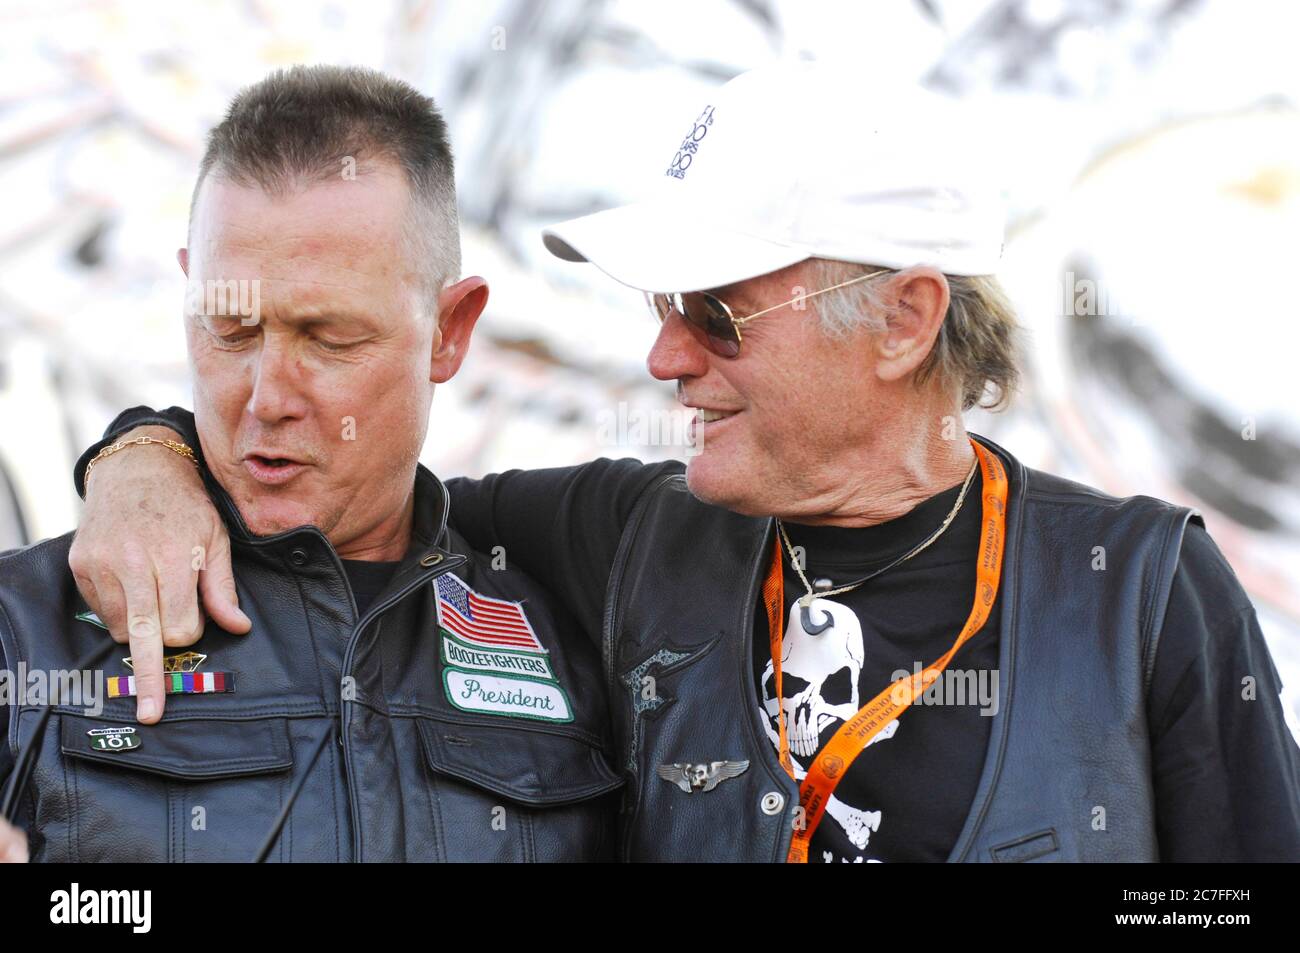 (L-R) Robert Patrick and Peter Fonda on stage at the Love Ride at the Pomona Fairplex on October 26, 2008 in Pomona, California. Credit: Jared Milgrim/The Photo Access Stock Photo